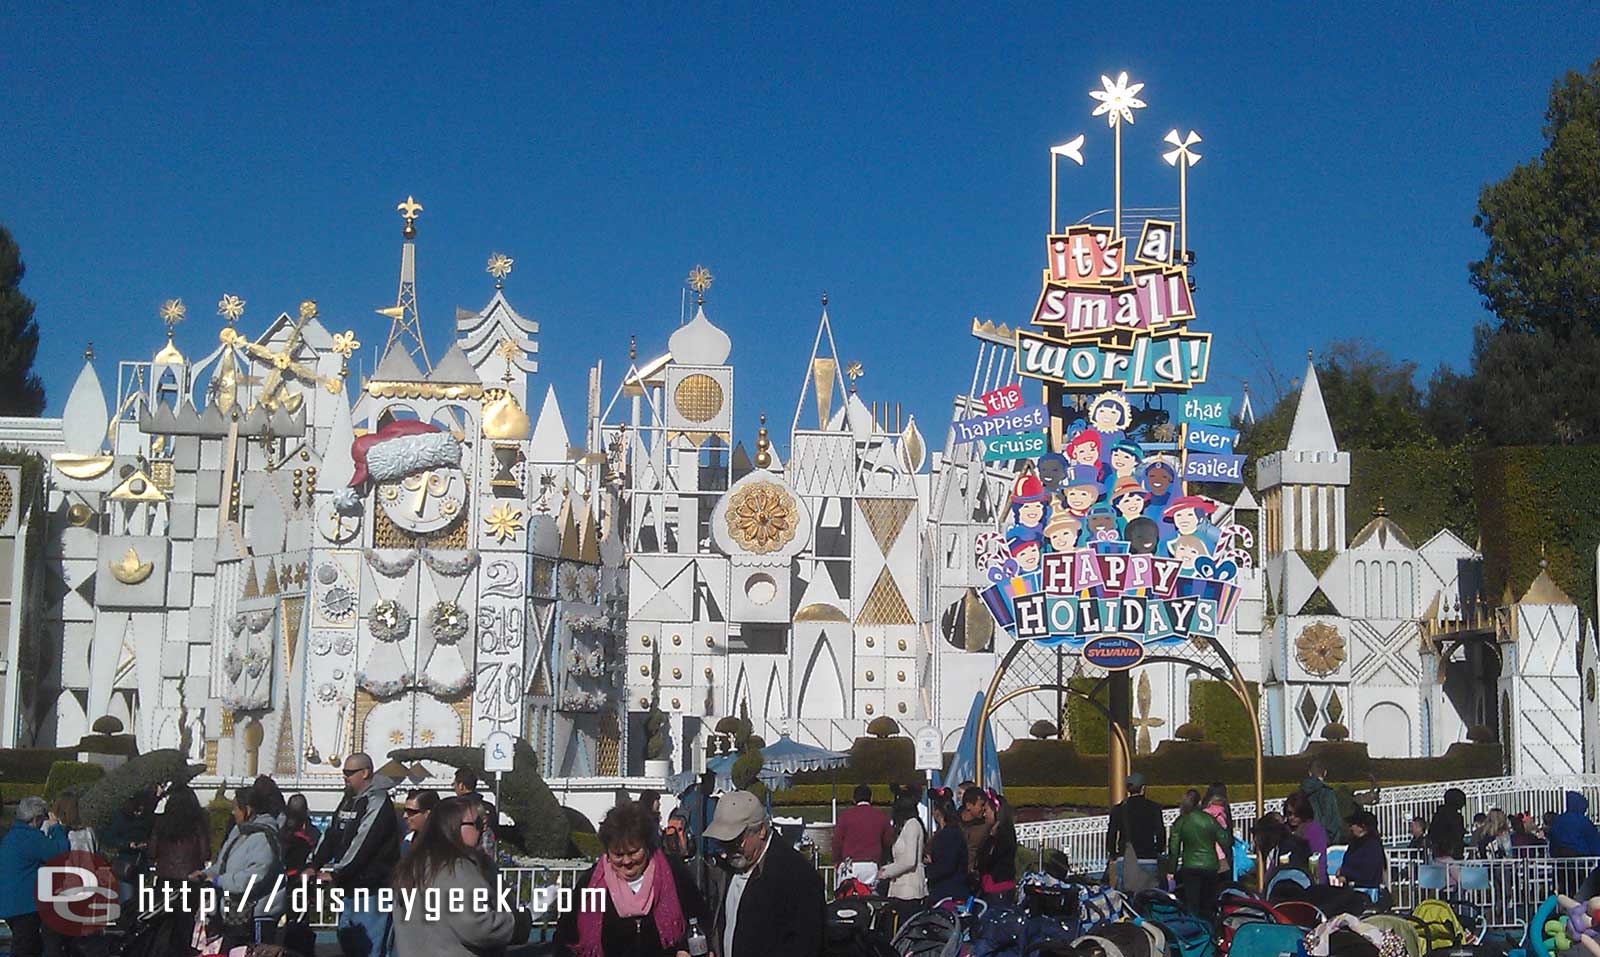 If you are still in a holiday mood you can experience Small World Holiday for a couple more weeks.